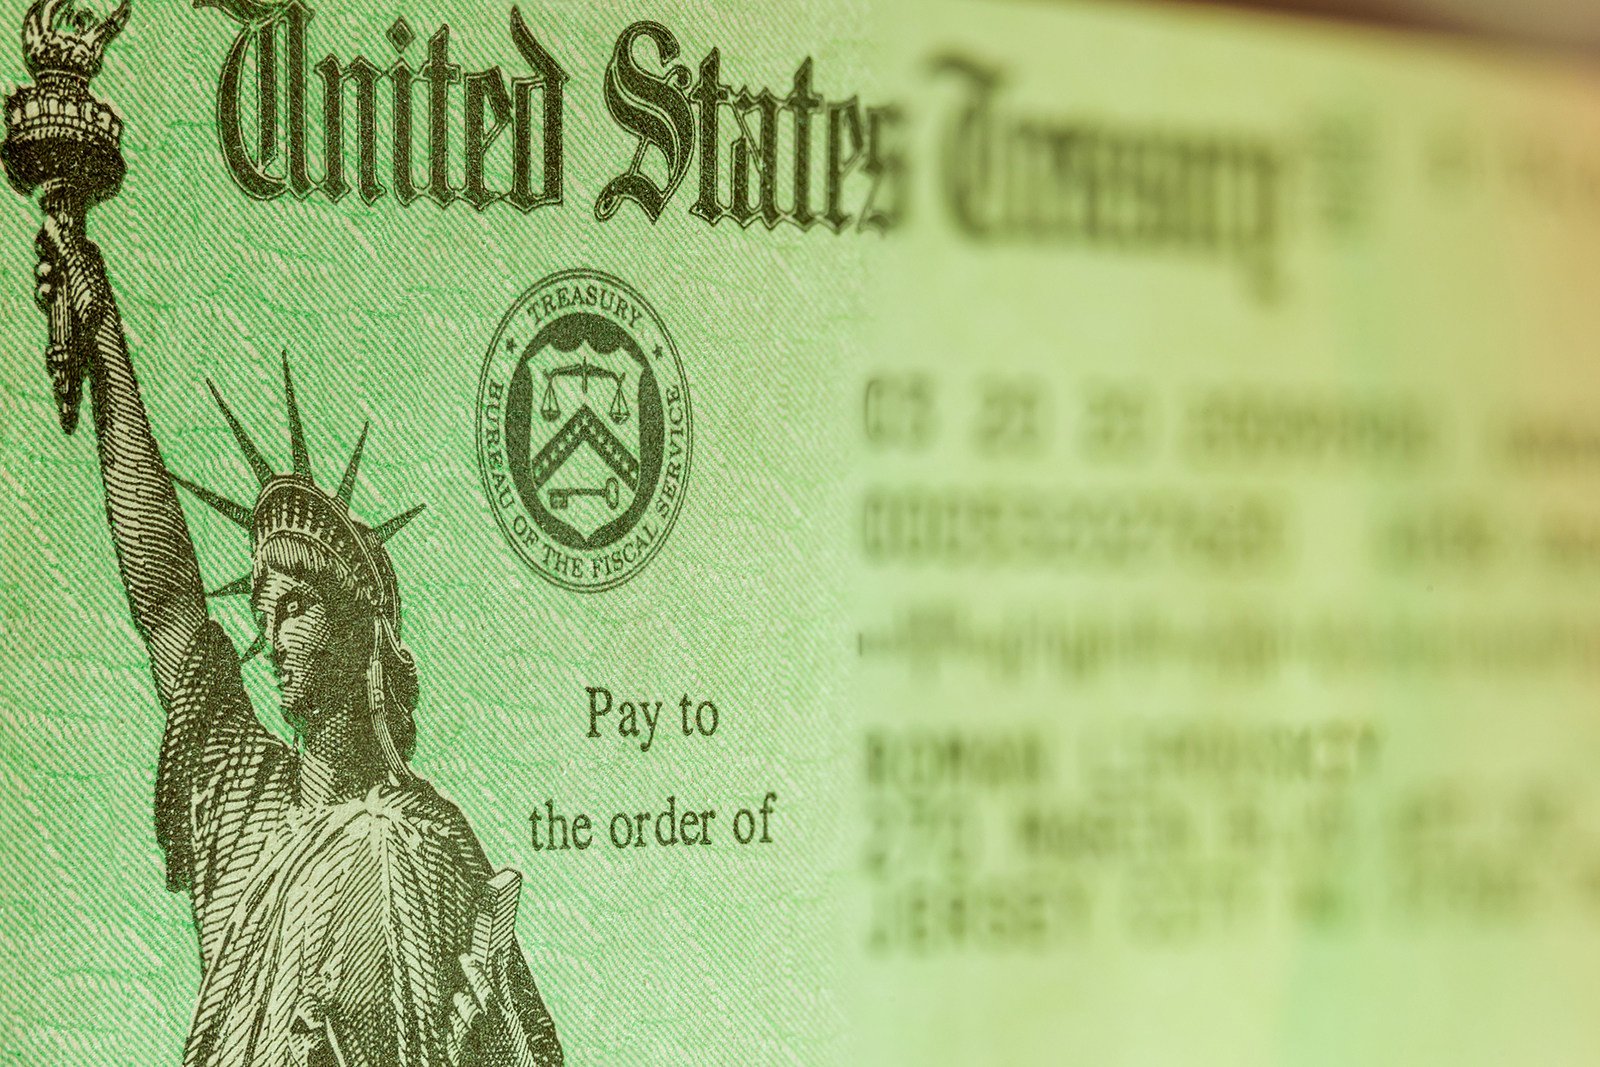 The stimulus payments issued by US President Joe Biden in 2021. Photo: TNS